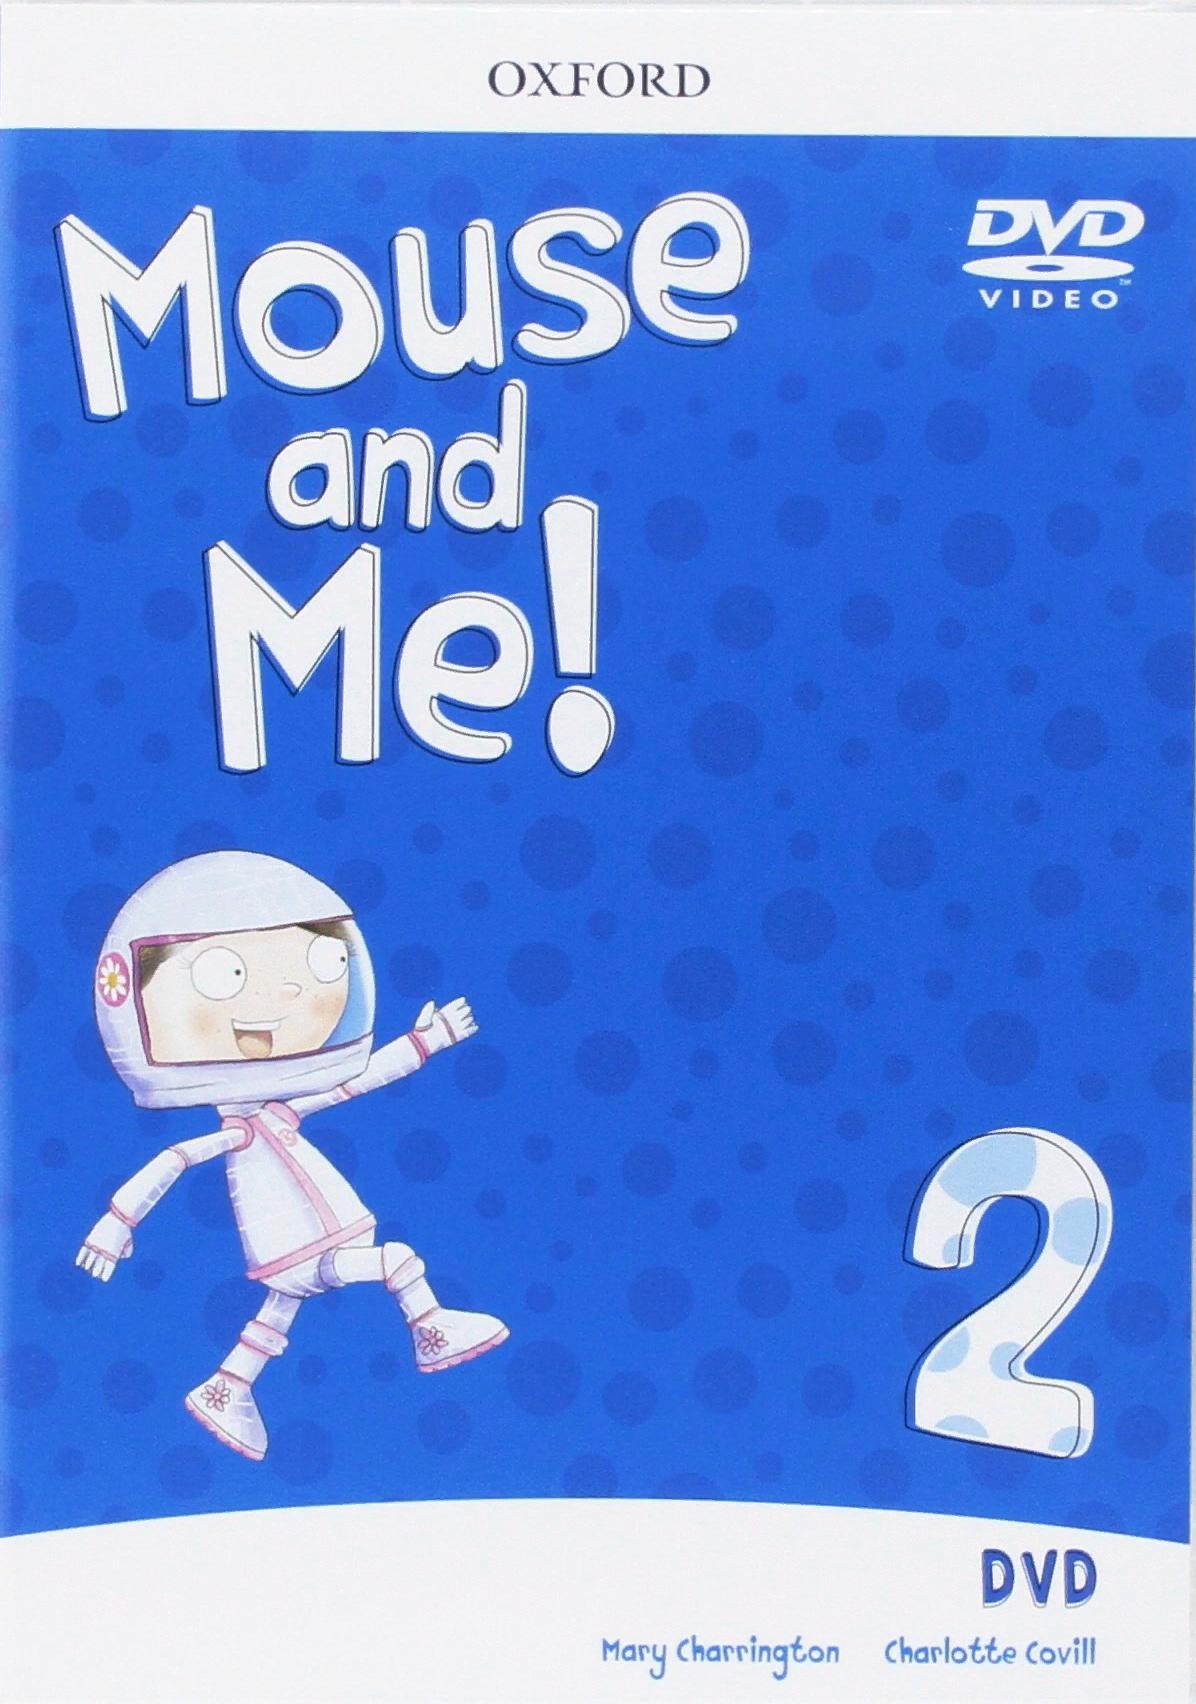 MOUSE AND ME! 2 DVD